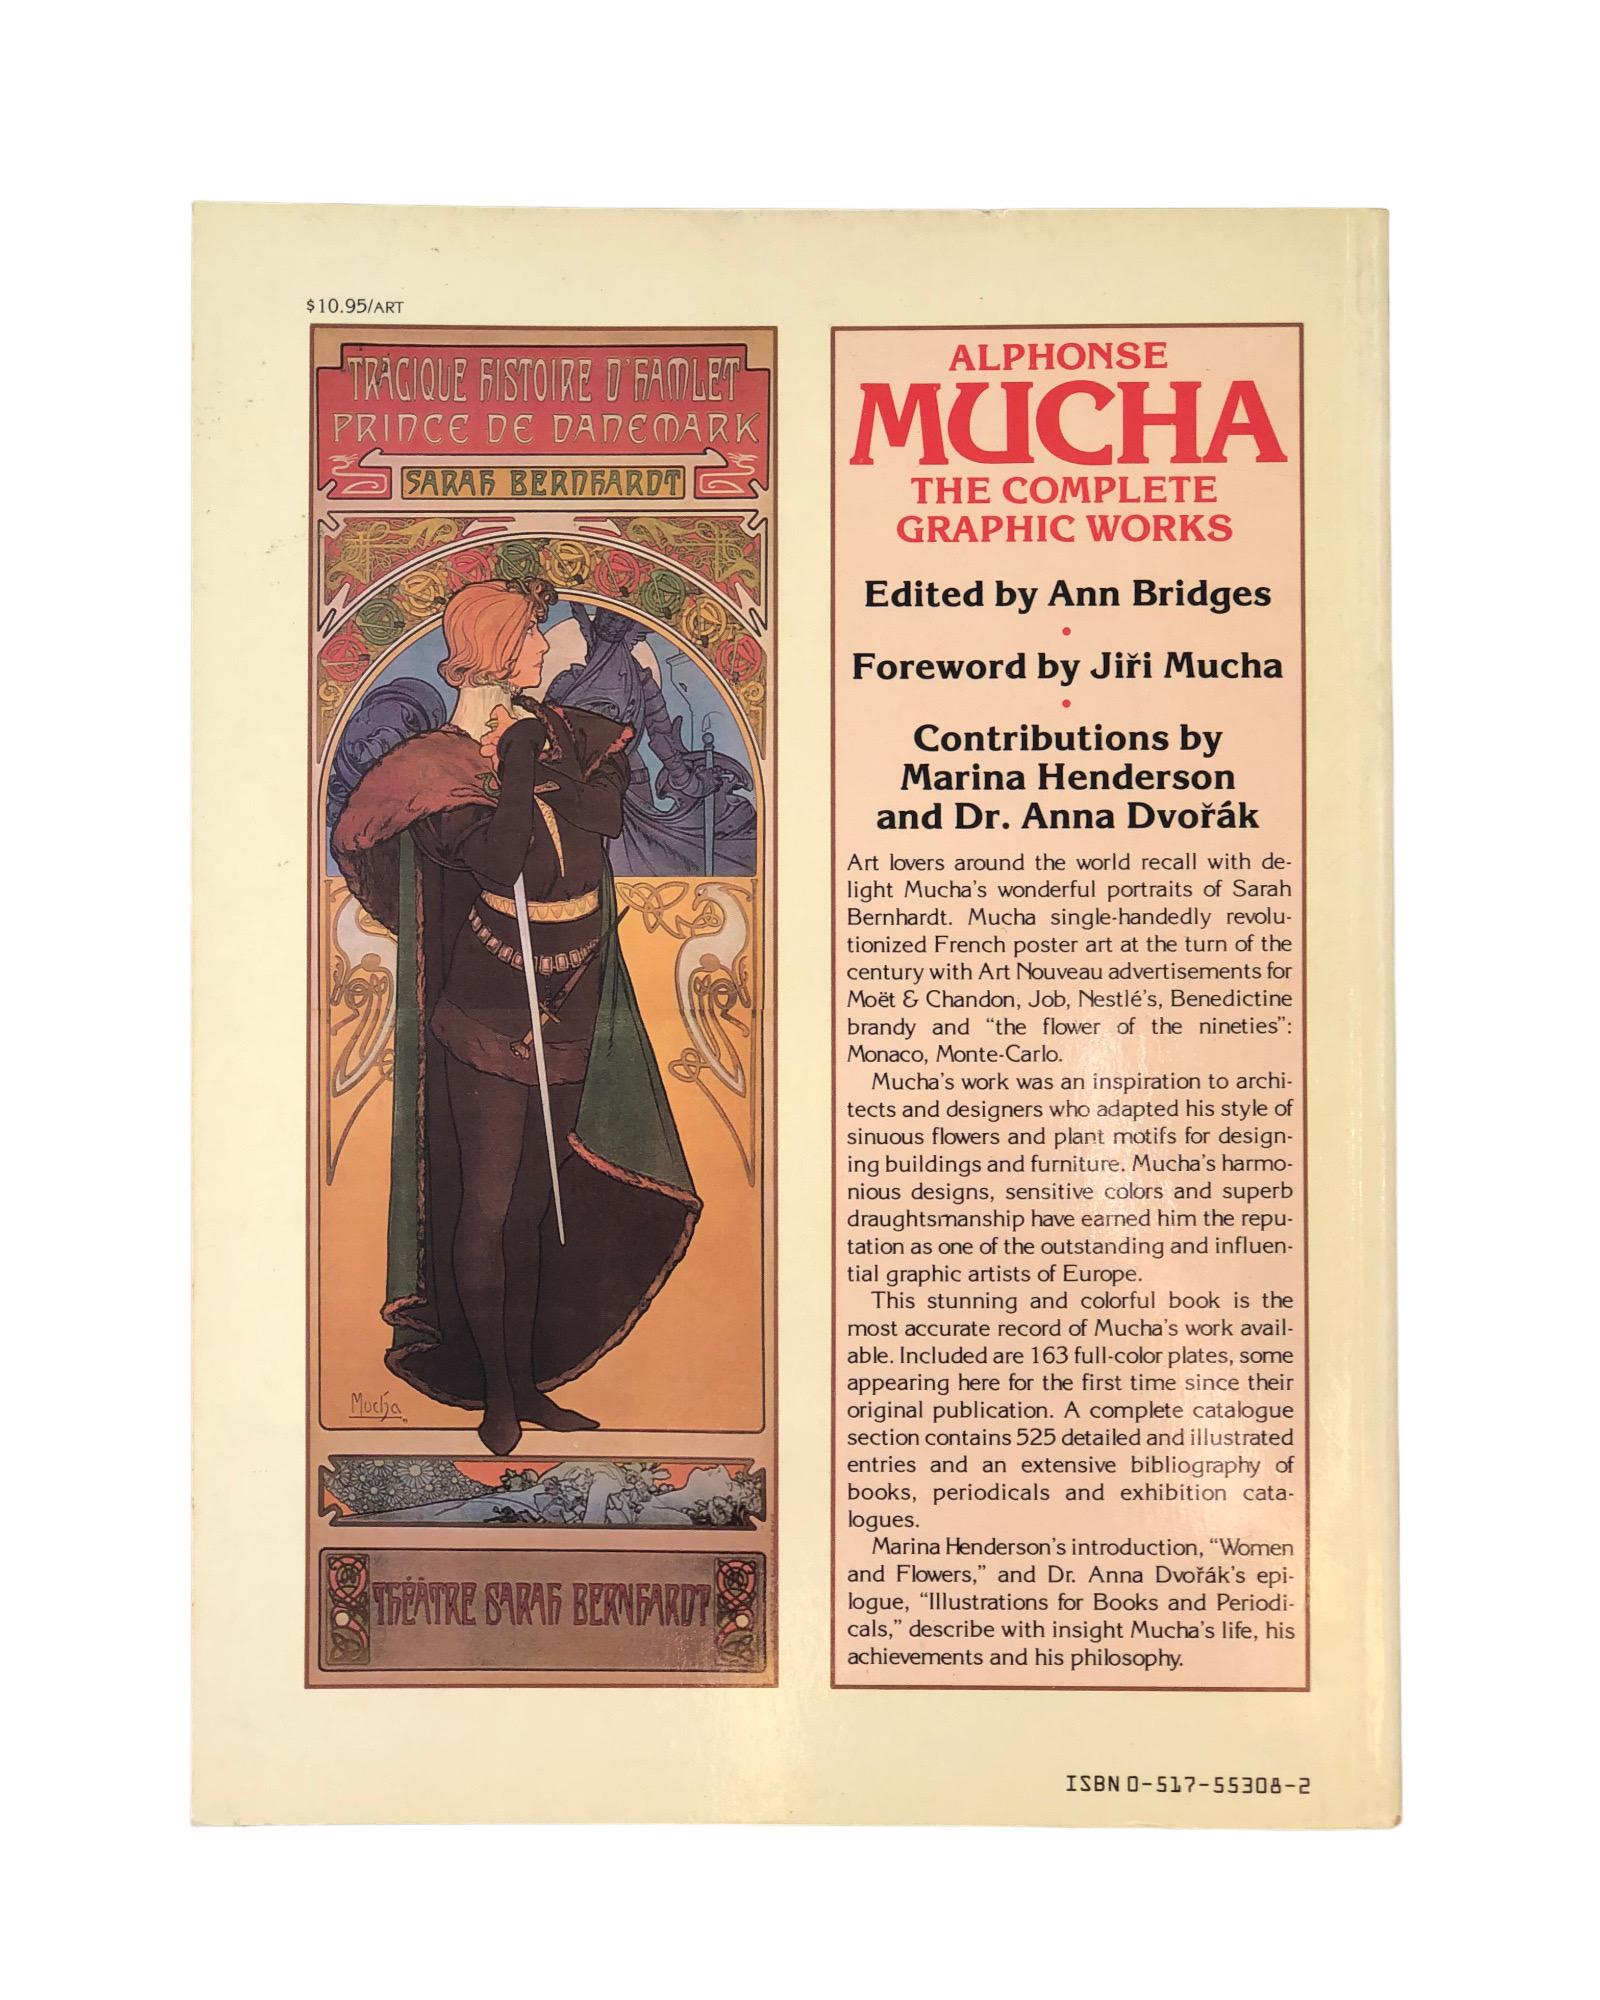 Alphonse Mucha - the Complete Graphic Works. Softcover book. First edition, published in 1980 by Harmony Books of New York. Printed and bound in Hong Kong. Illustrated, 192 pages.